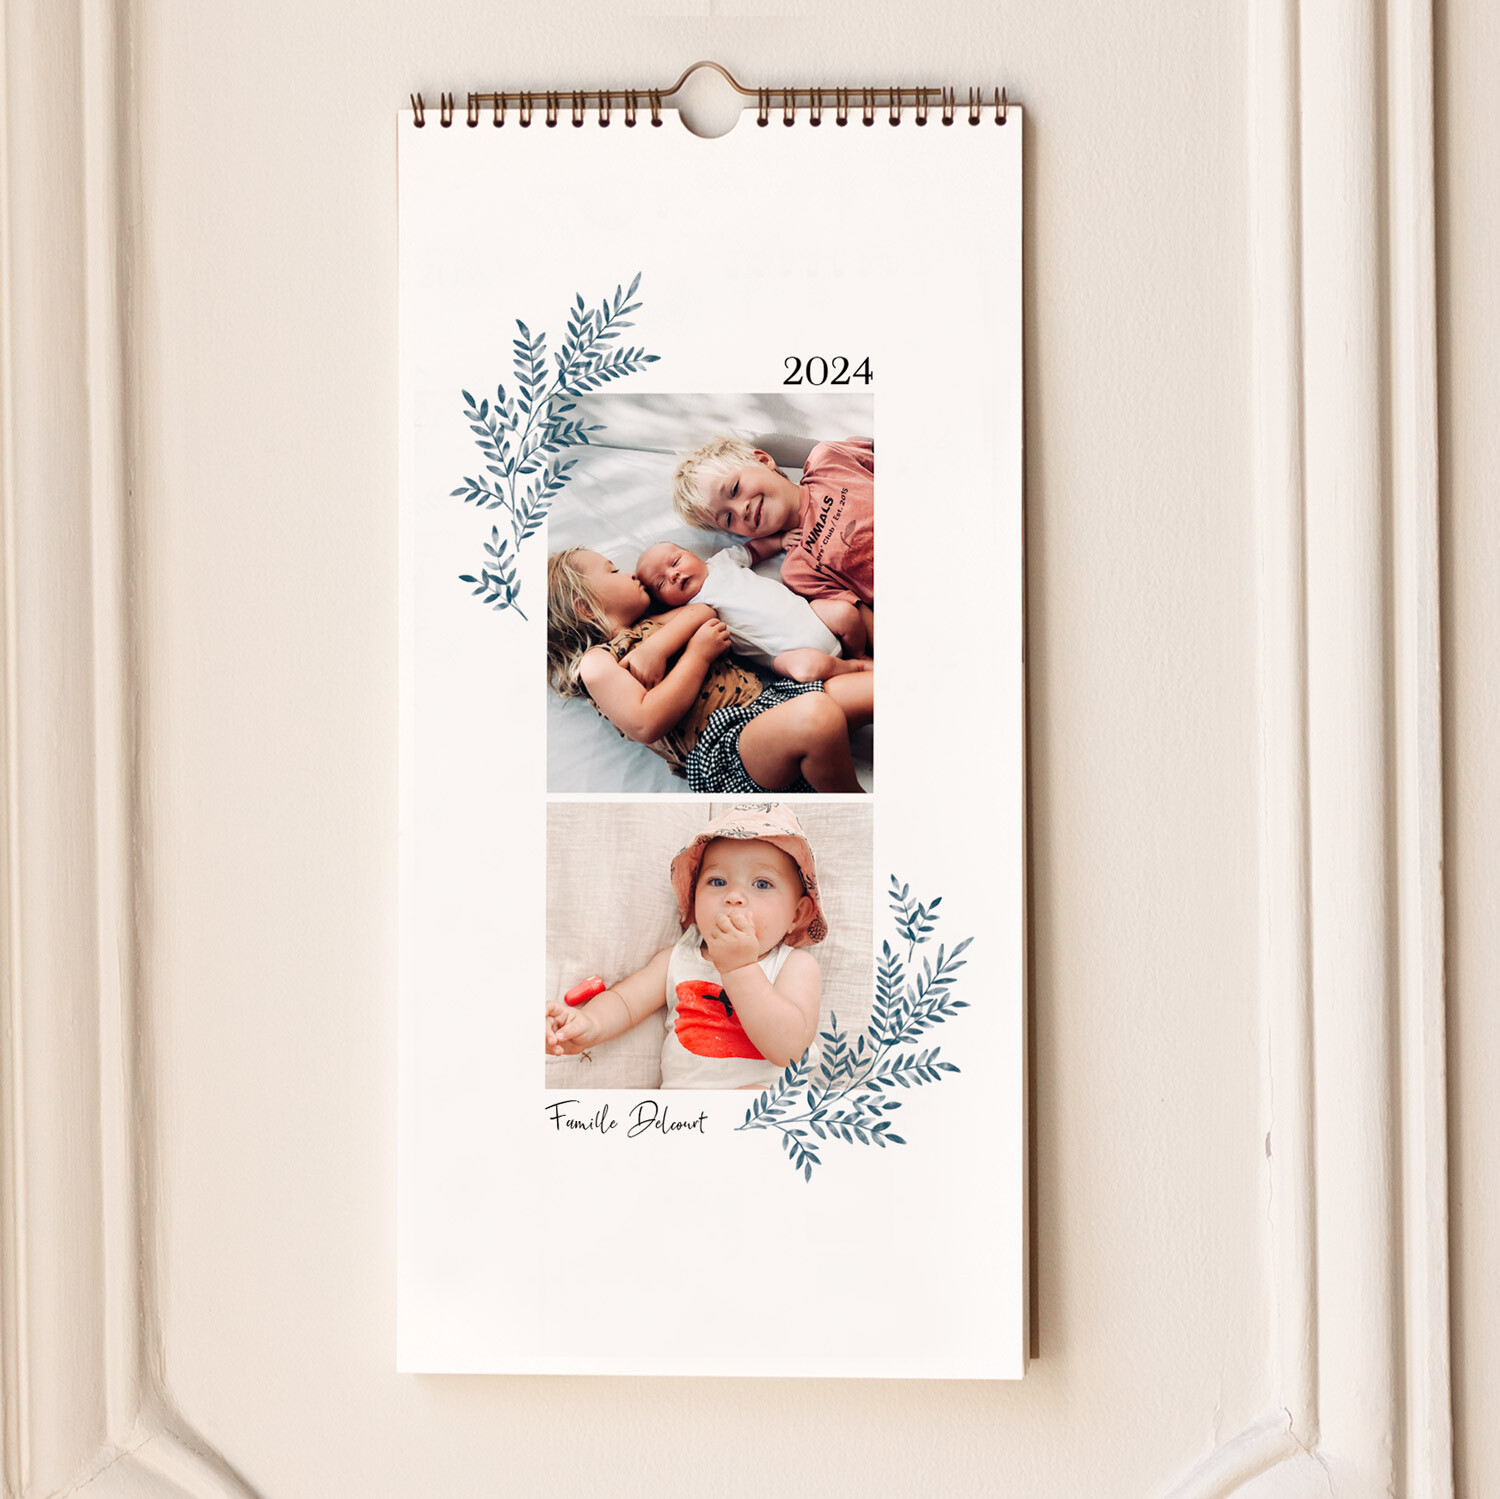 Calendrier grand format cases personnalisables